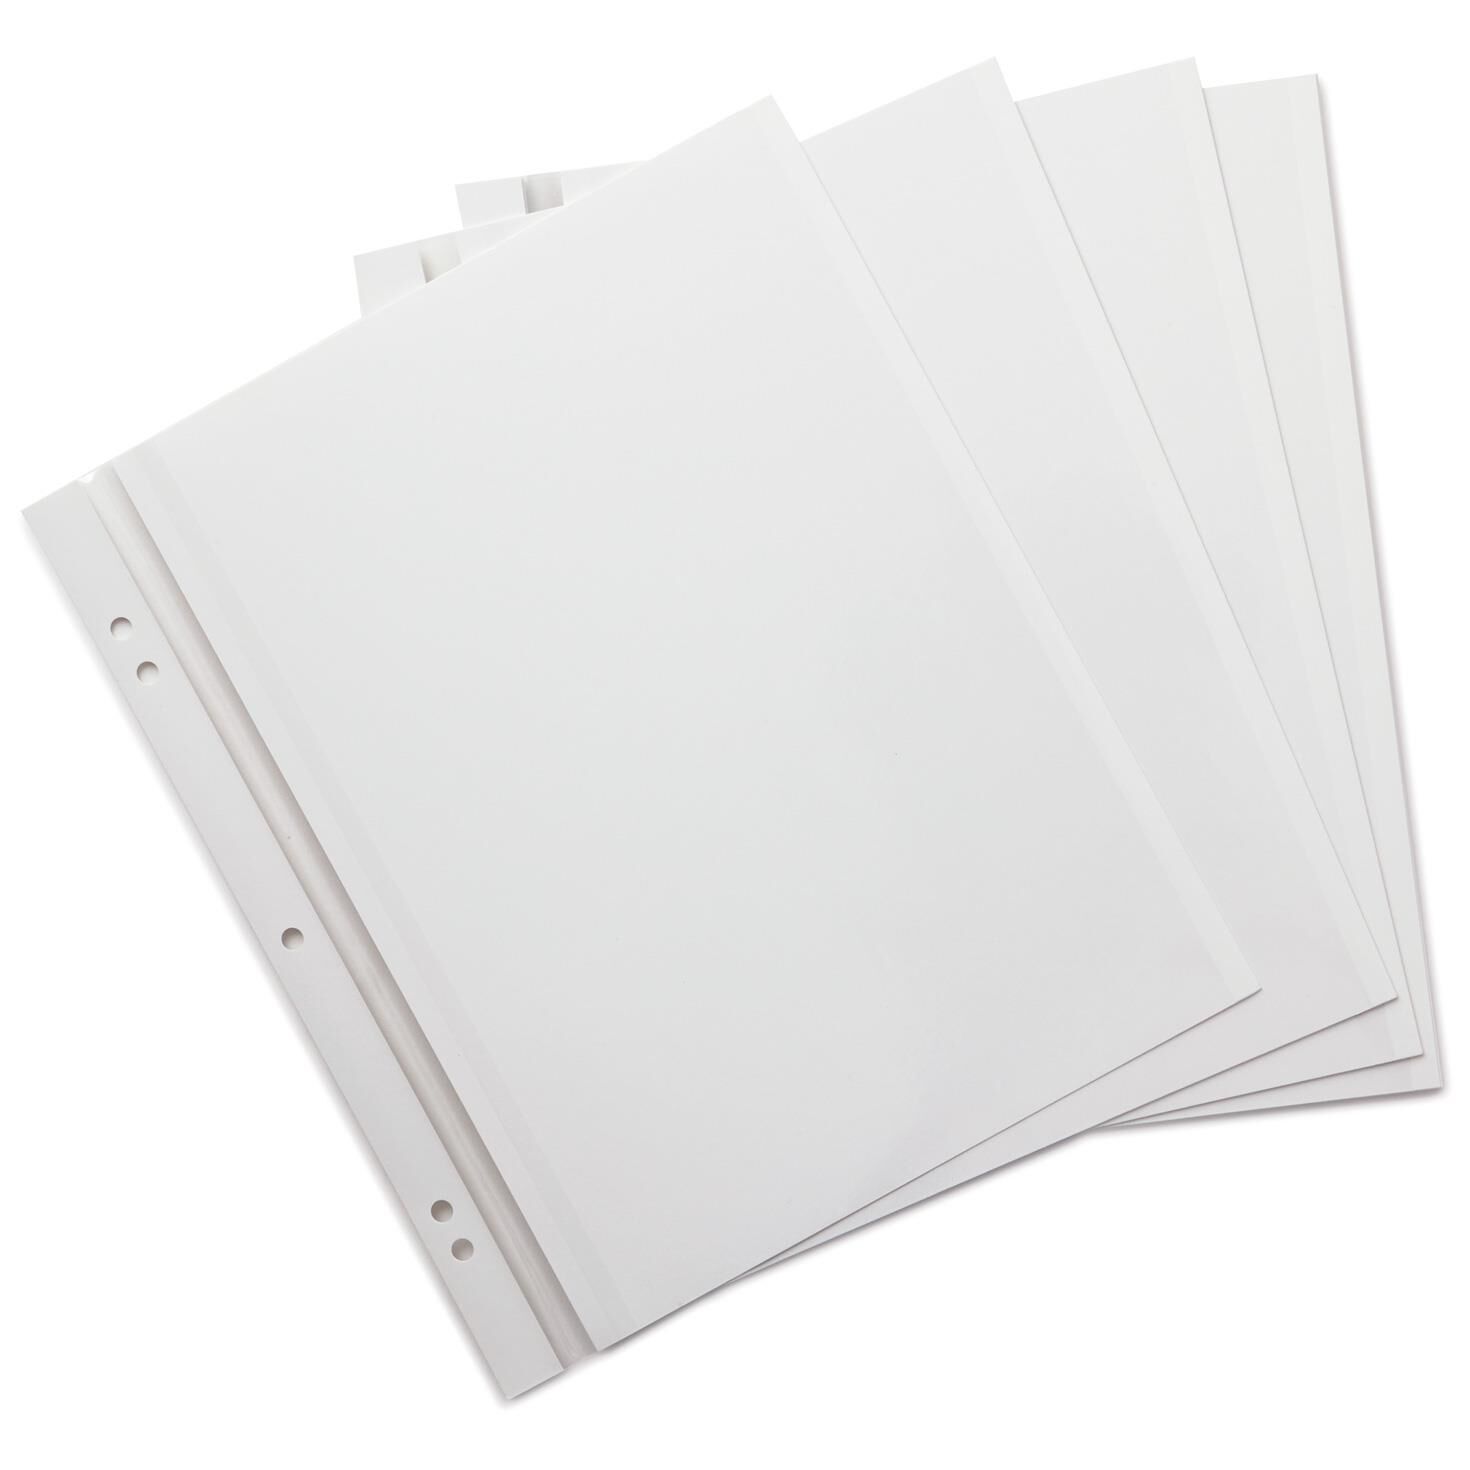 Self-Adhesive Photo Refill Pages, Pack of 16 - Photo Albums - Hallmark